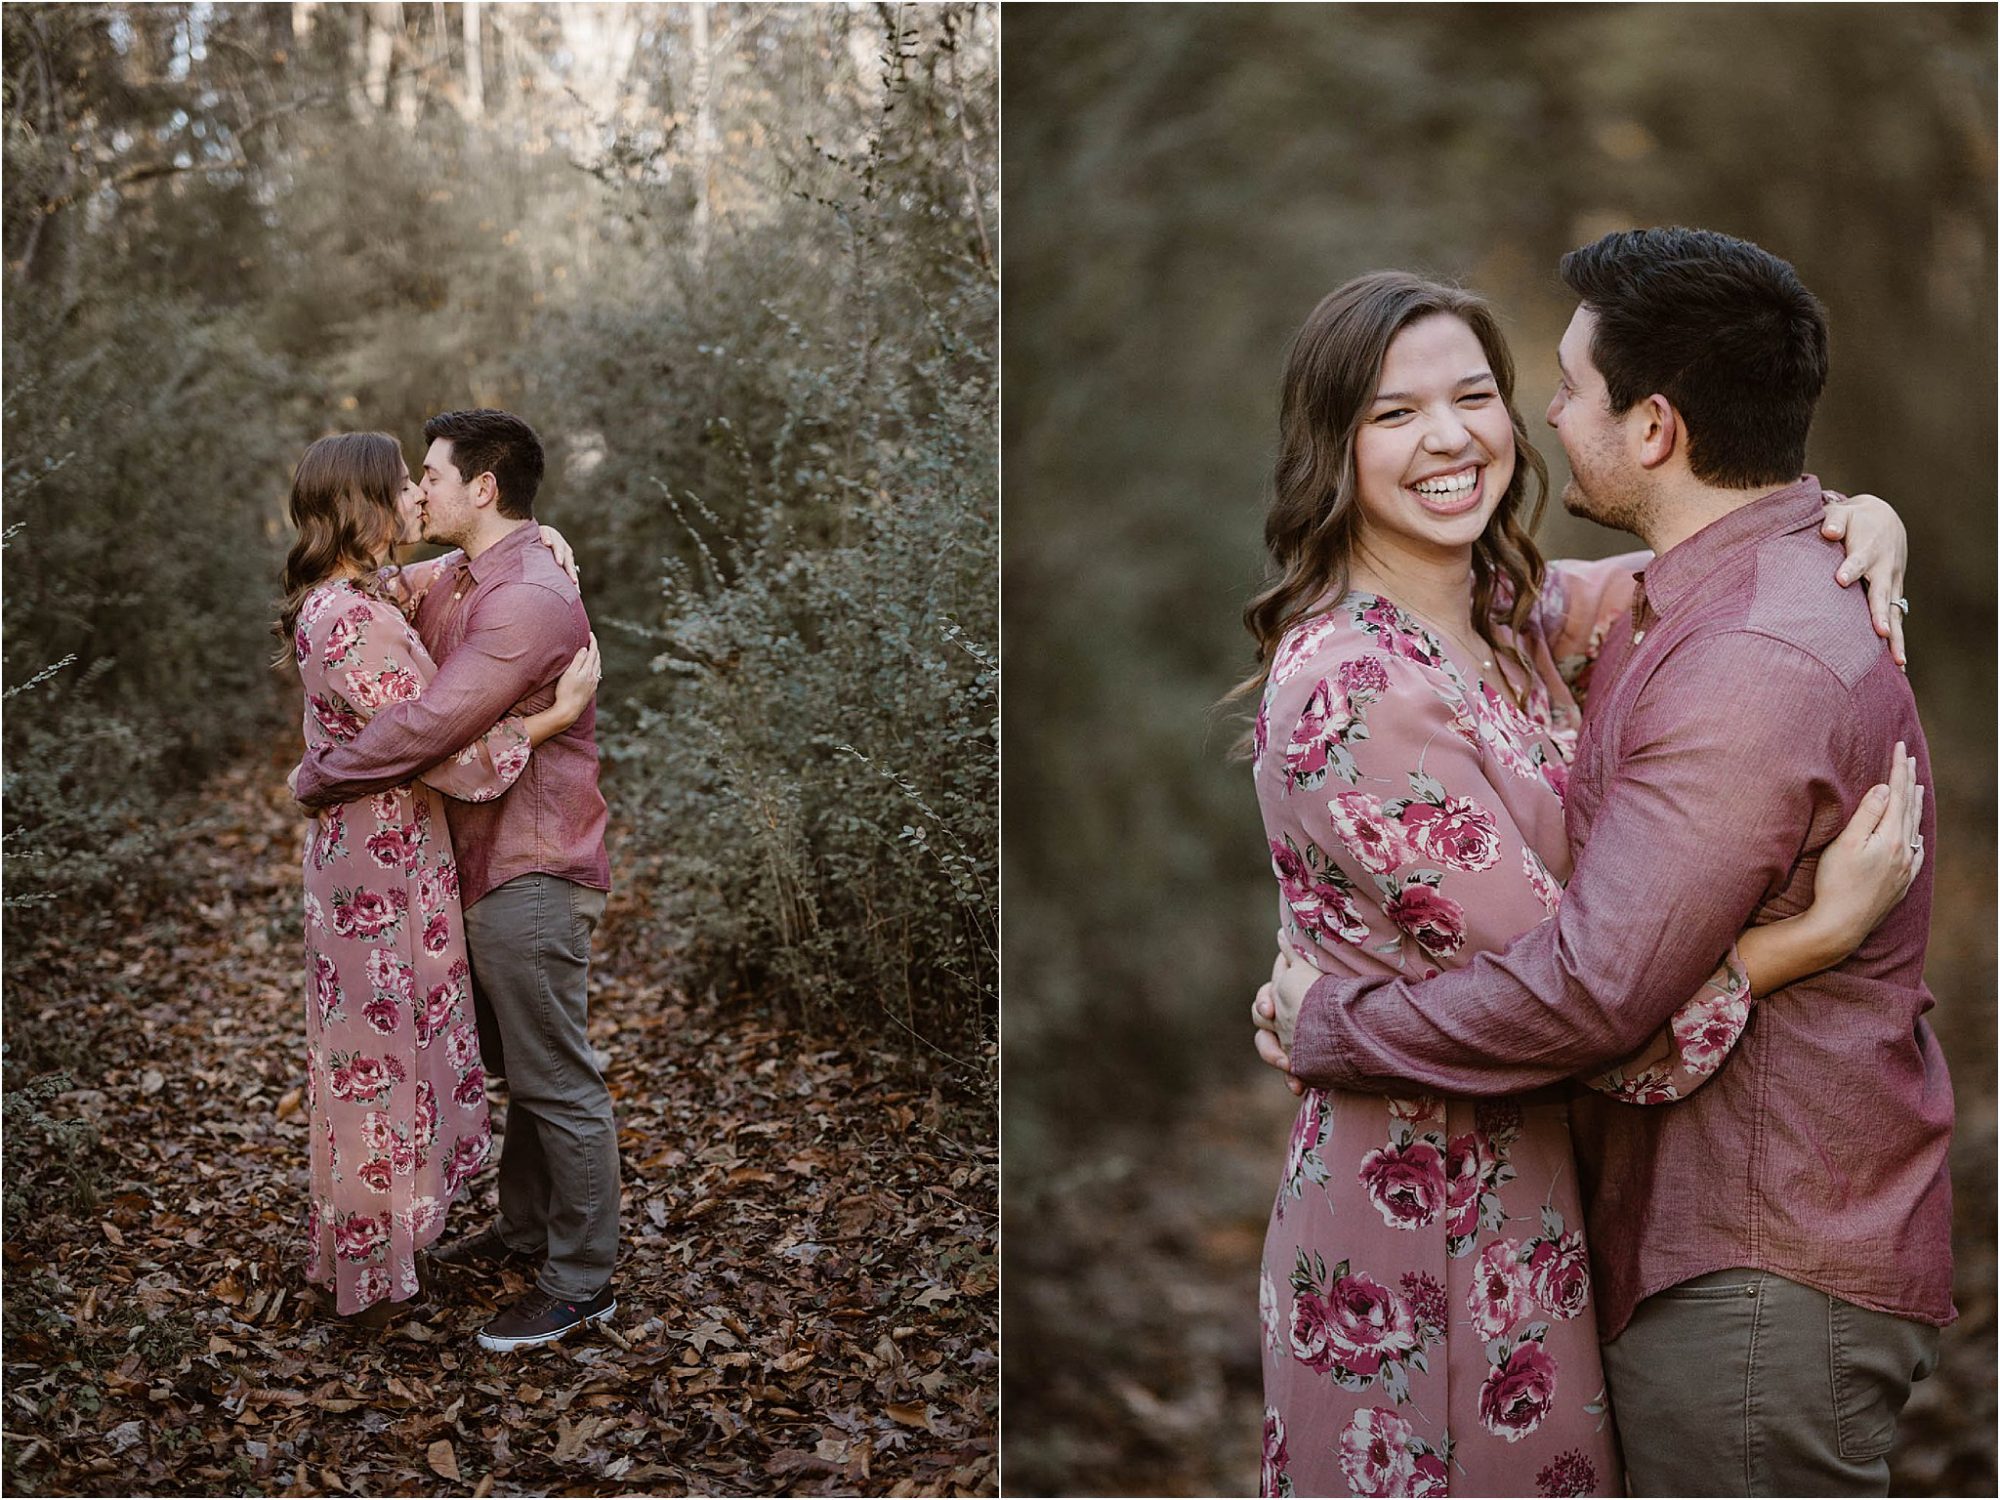 boy and girl in pink and maroon outfits kissing in woods